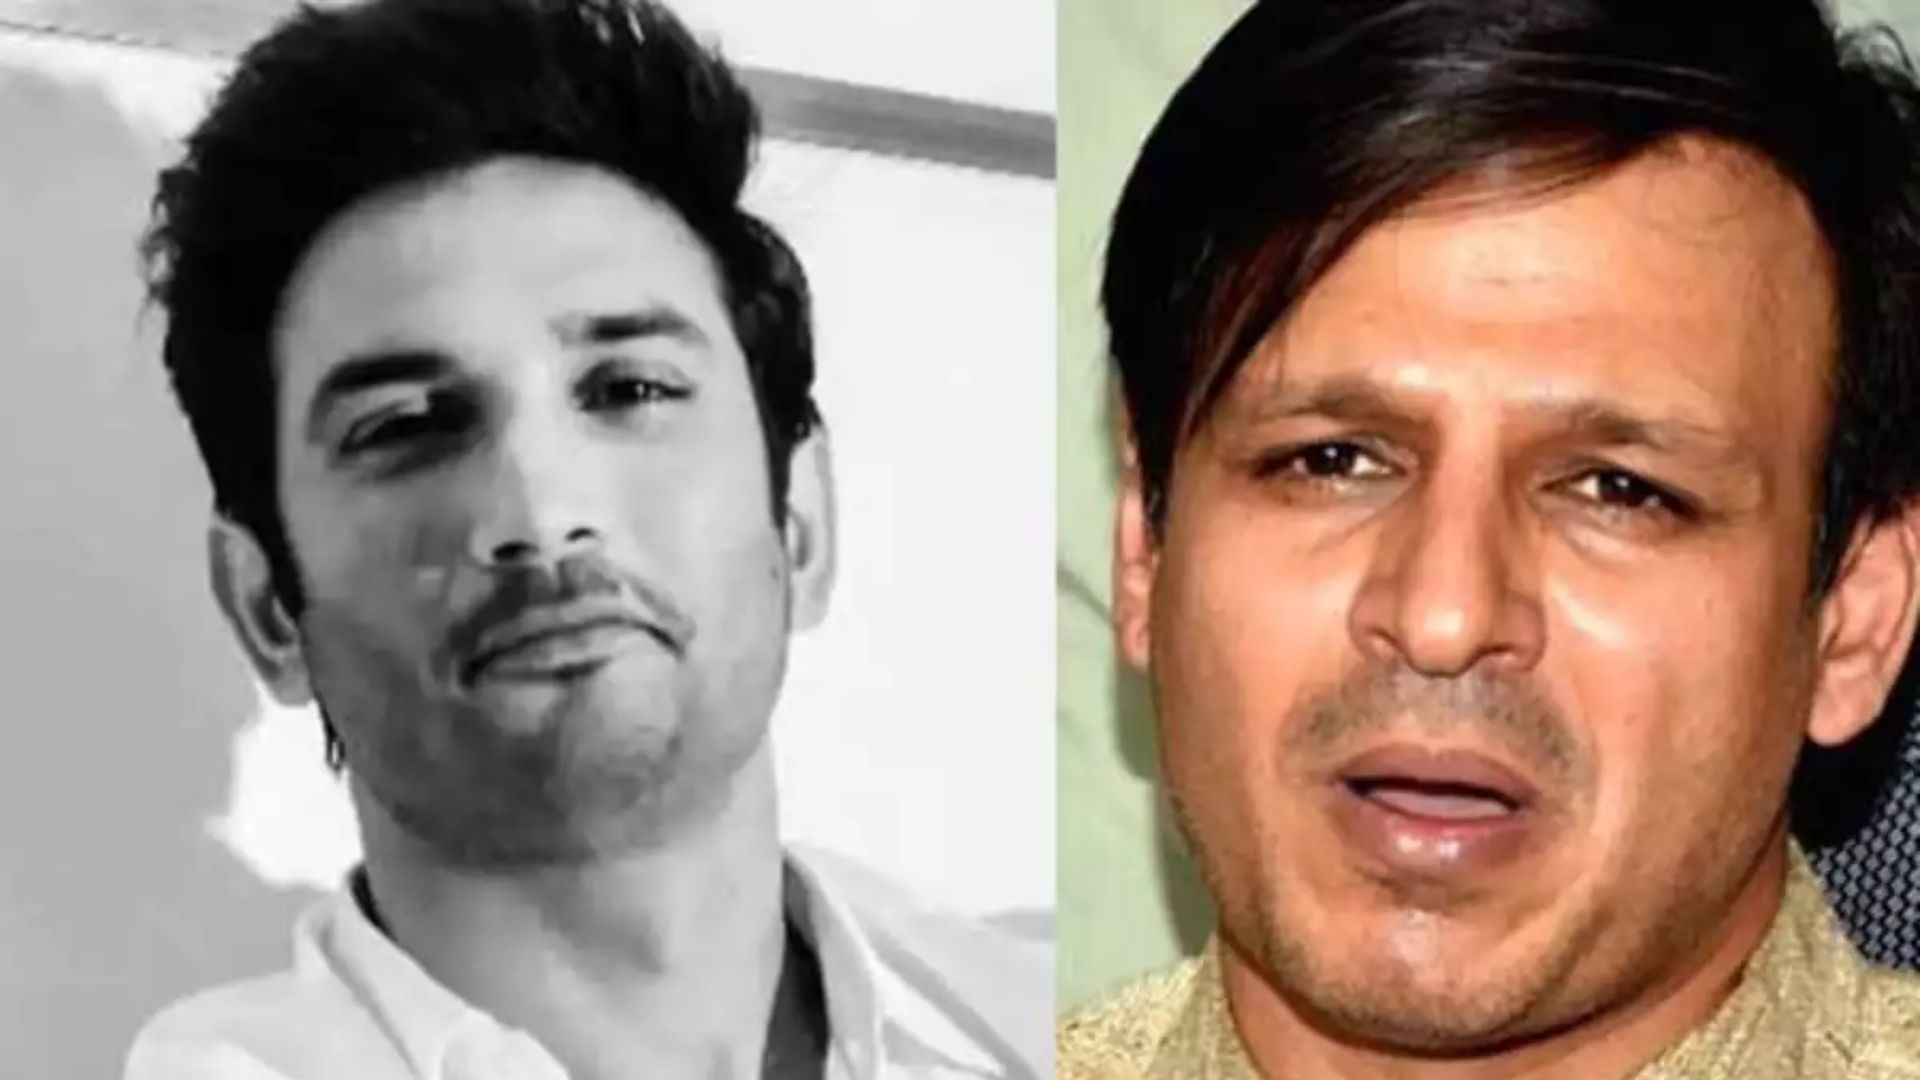 Vivek Oberoi Reflects on Attending Sushant Singh Rajput’s Funeral, Reveals Struggles with Mental Health: ‘I’ve Been at the Edge of Darkness’